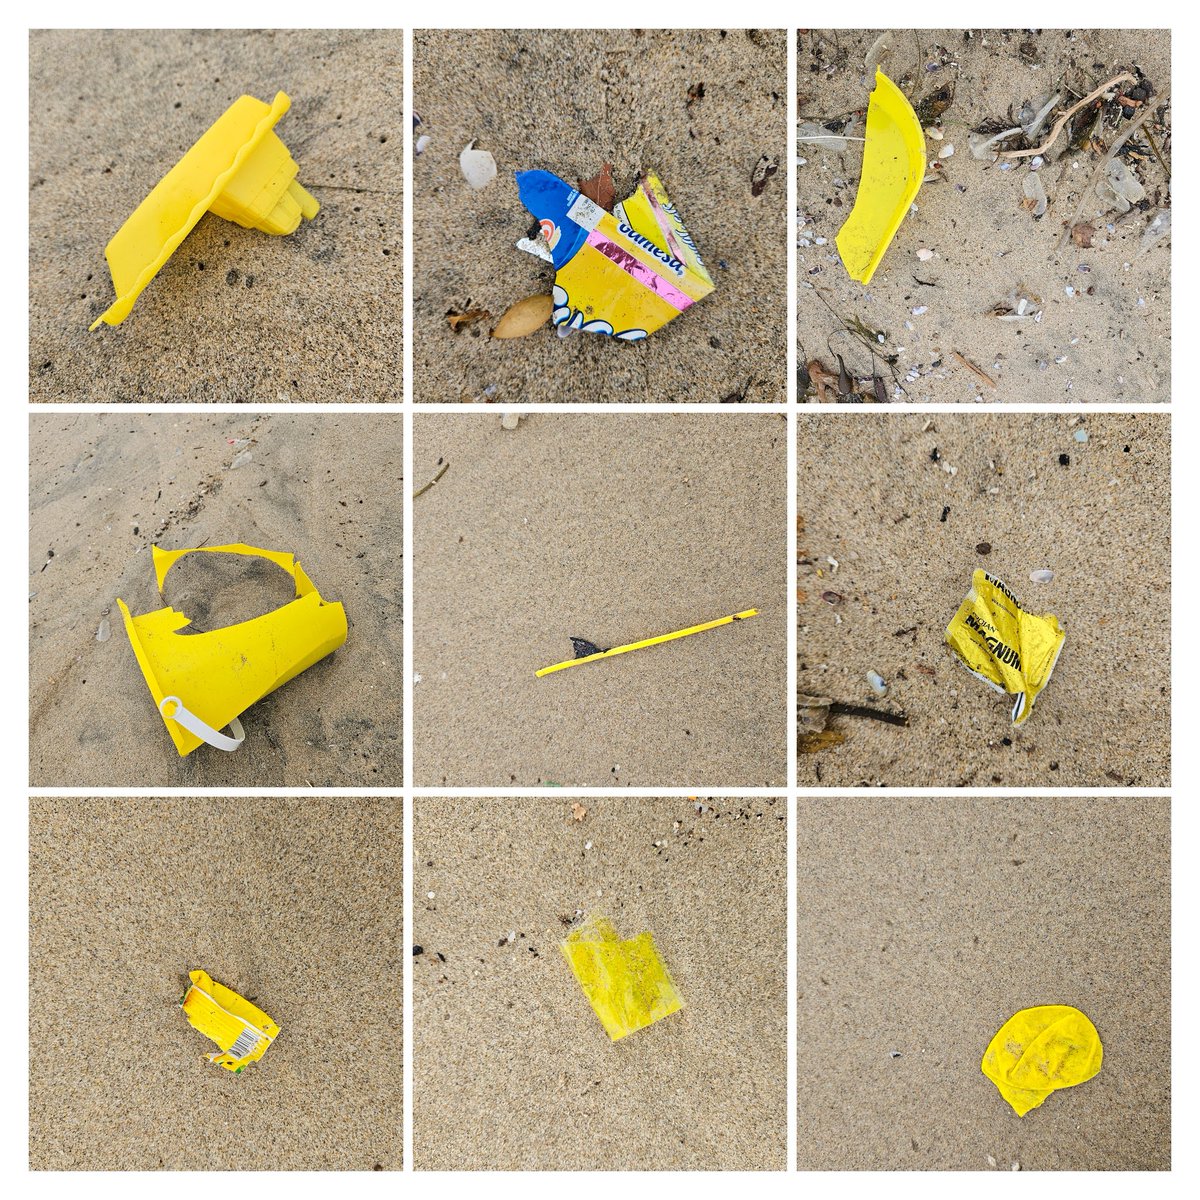 April 12. Trash vendor of the day is @McDonalds and Trash color of the day is Yellow. #Plasticpollution #EarthCleanUp #CleanBeaches #lovewhereyoulive